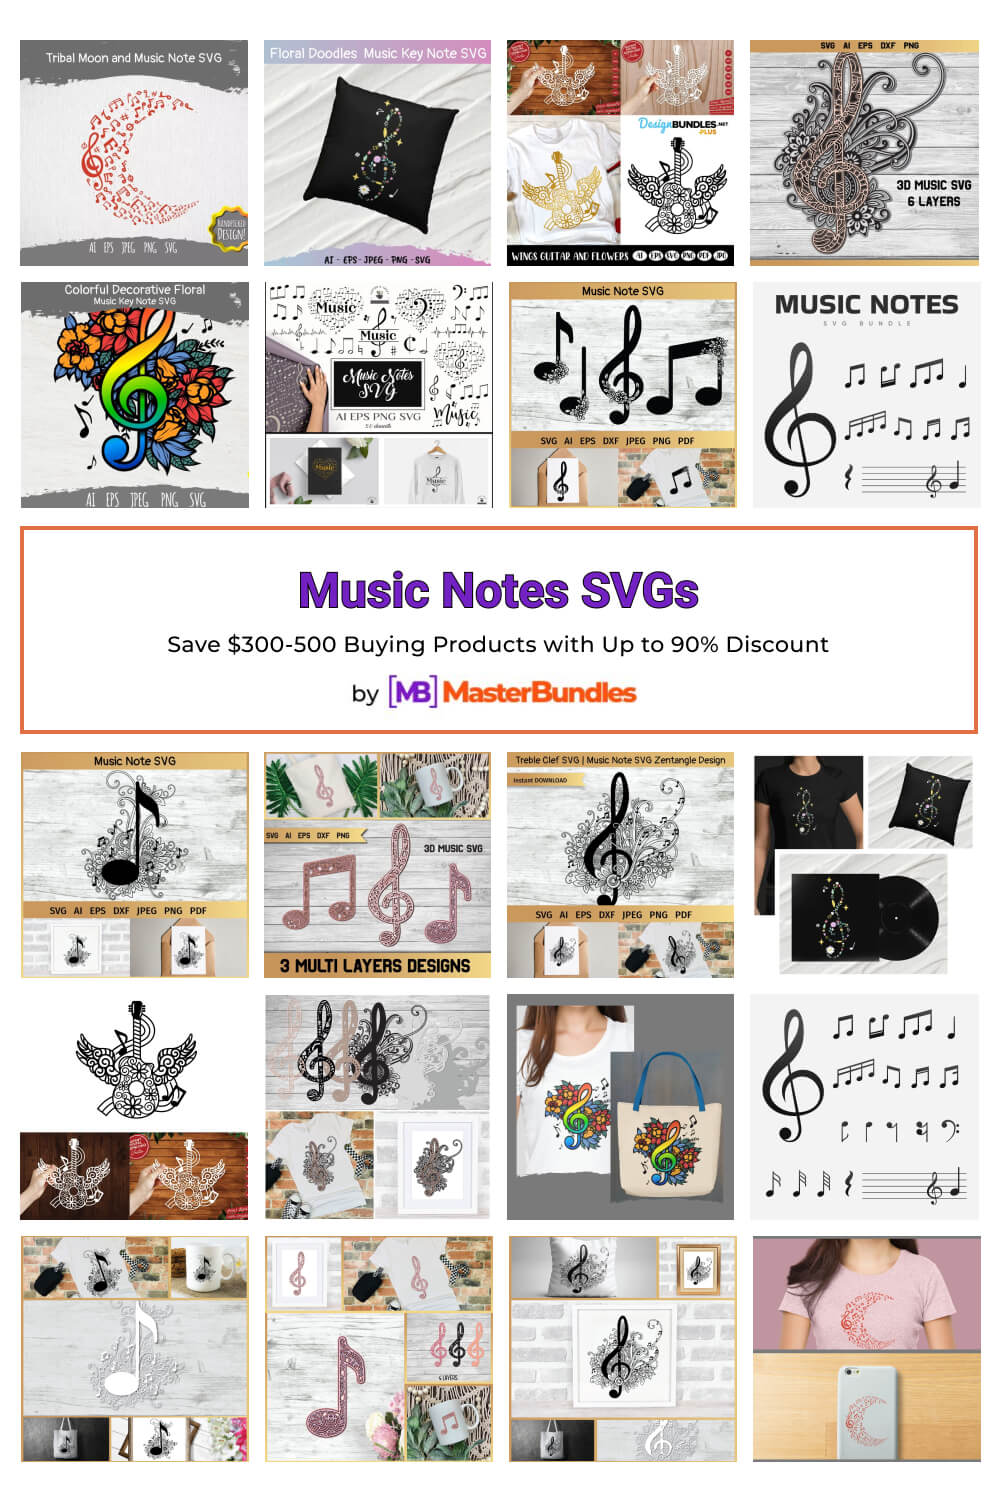 music notes svgs pinterest image.